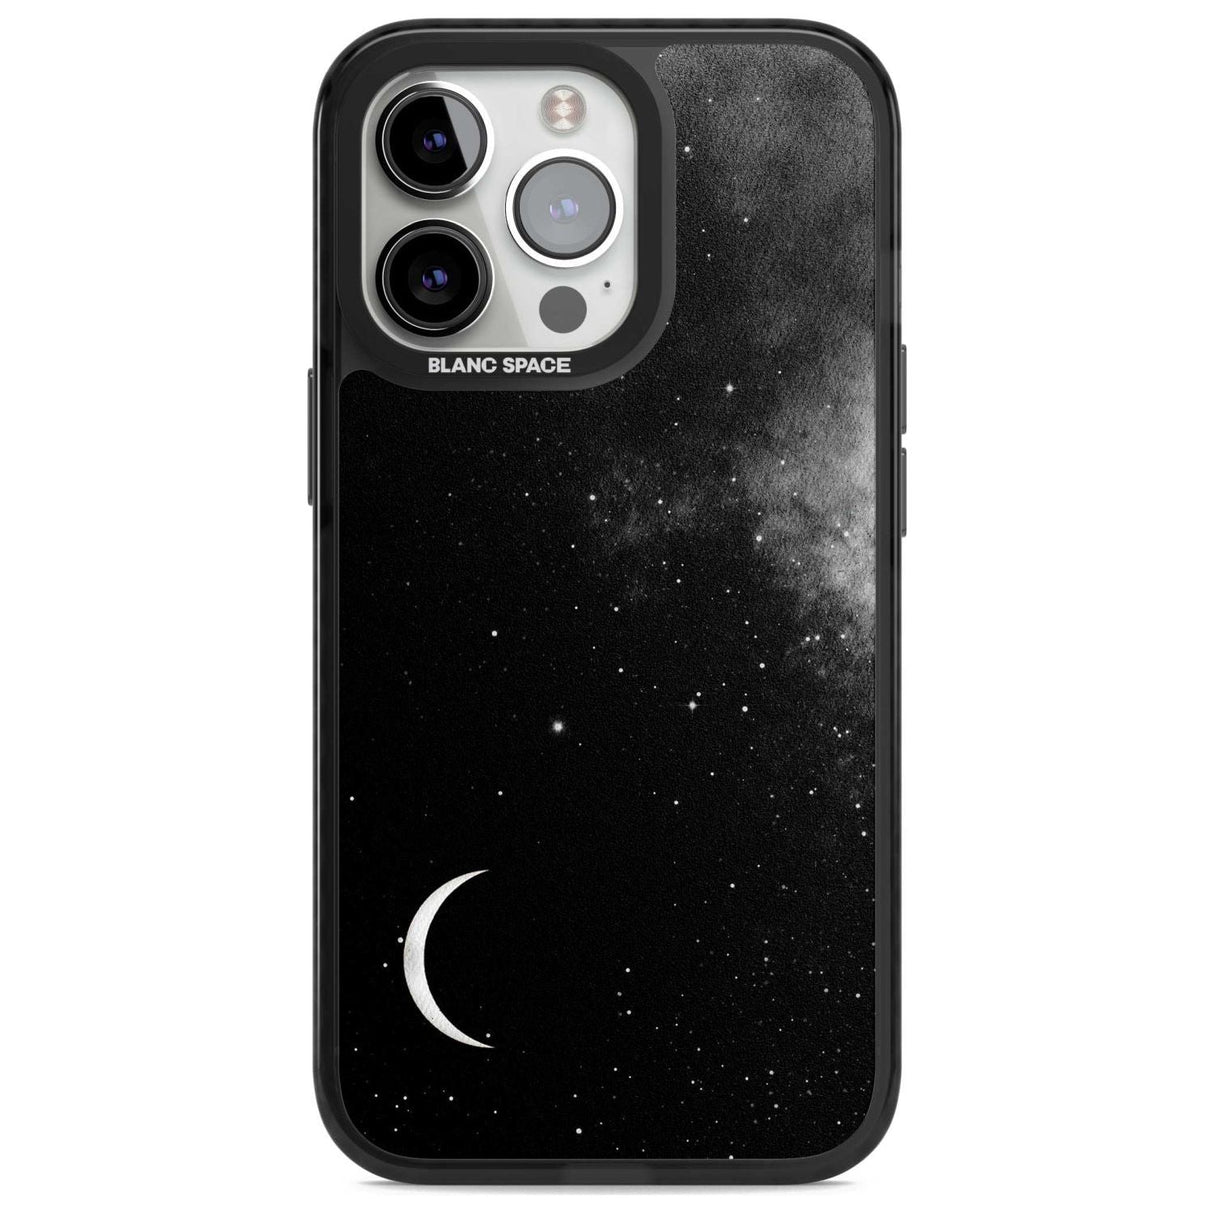 Night Sky Galaxies: Crescent Moon Phone Case iPhone 15 Pro / Magsafe Black Impact Case,iPhone 15 Pro Max / Magsafe Black Impact Case,iPhone 14 Pro Max / Magsafe Black Impact Case,iPhone 13 Pro / Magsafe Black Impact Case,iPhone 14 Pro / Magsafe Black Impact Case Blanc Space